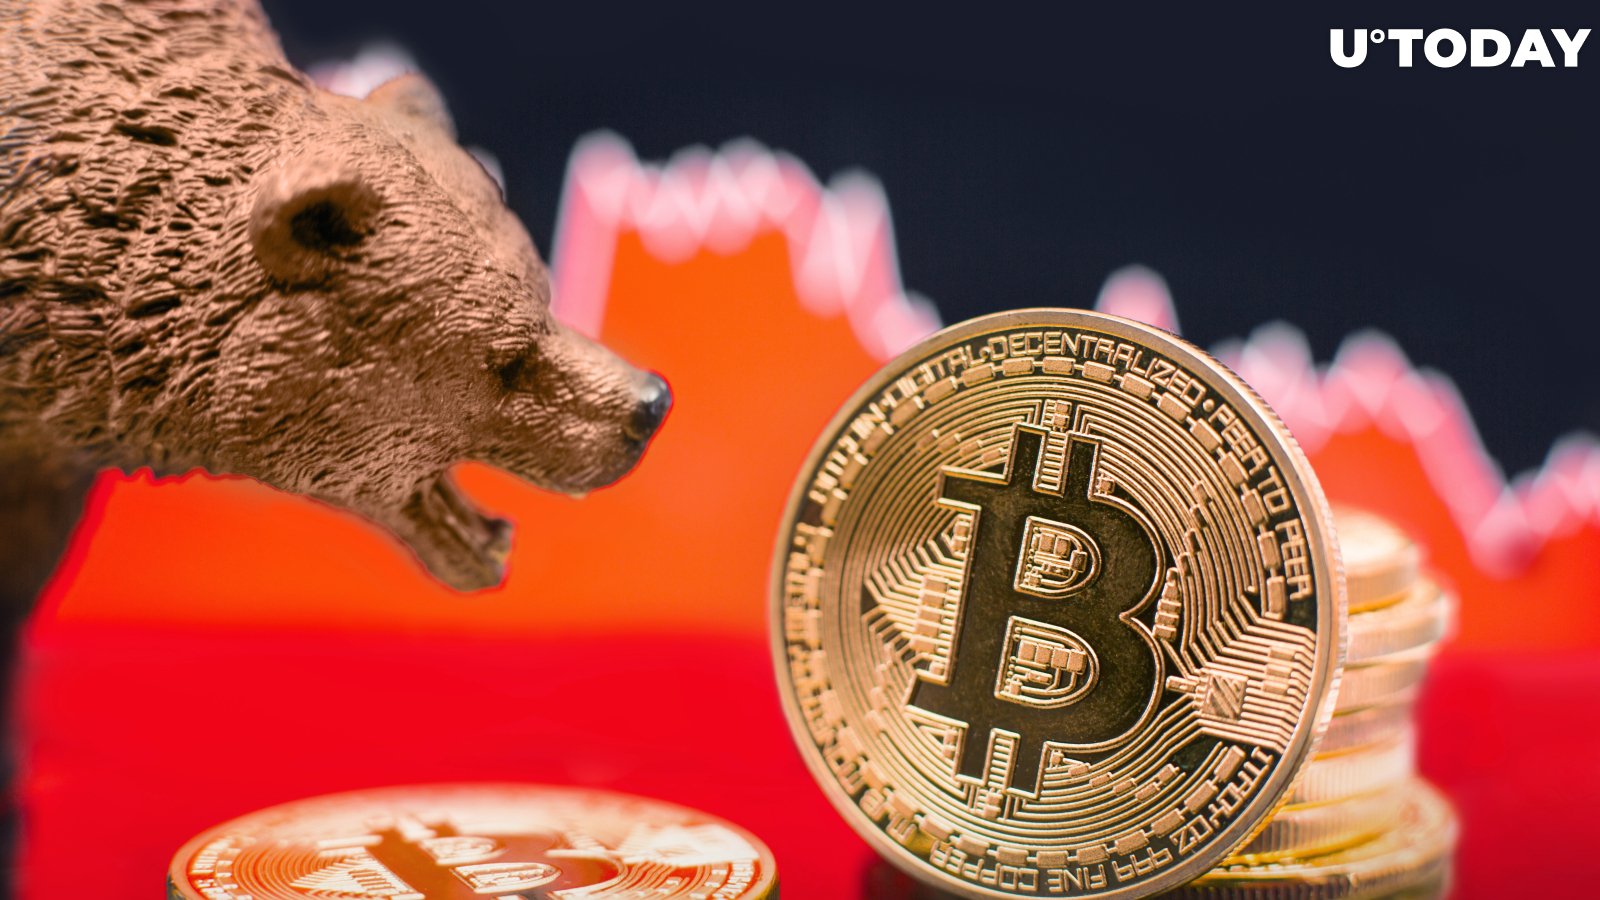 Former Bitcoin Bull Now Predicts Crash to $10,000: "It's Gonna Get Worse and Worse, and Worse"